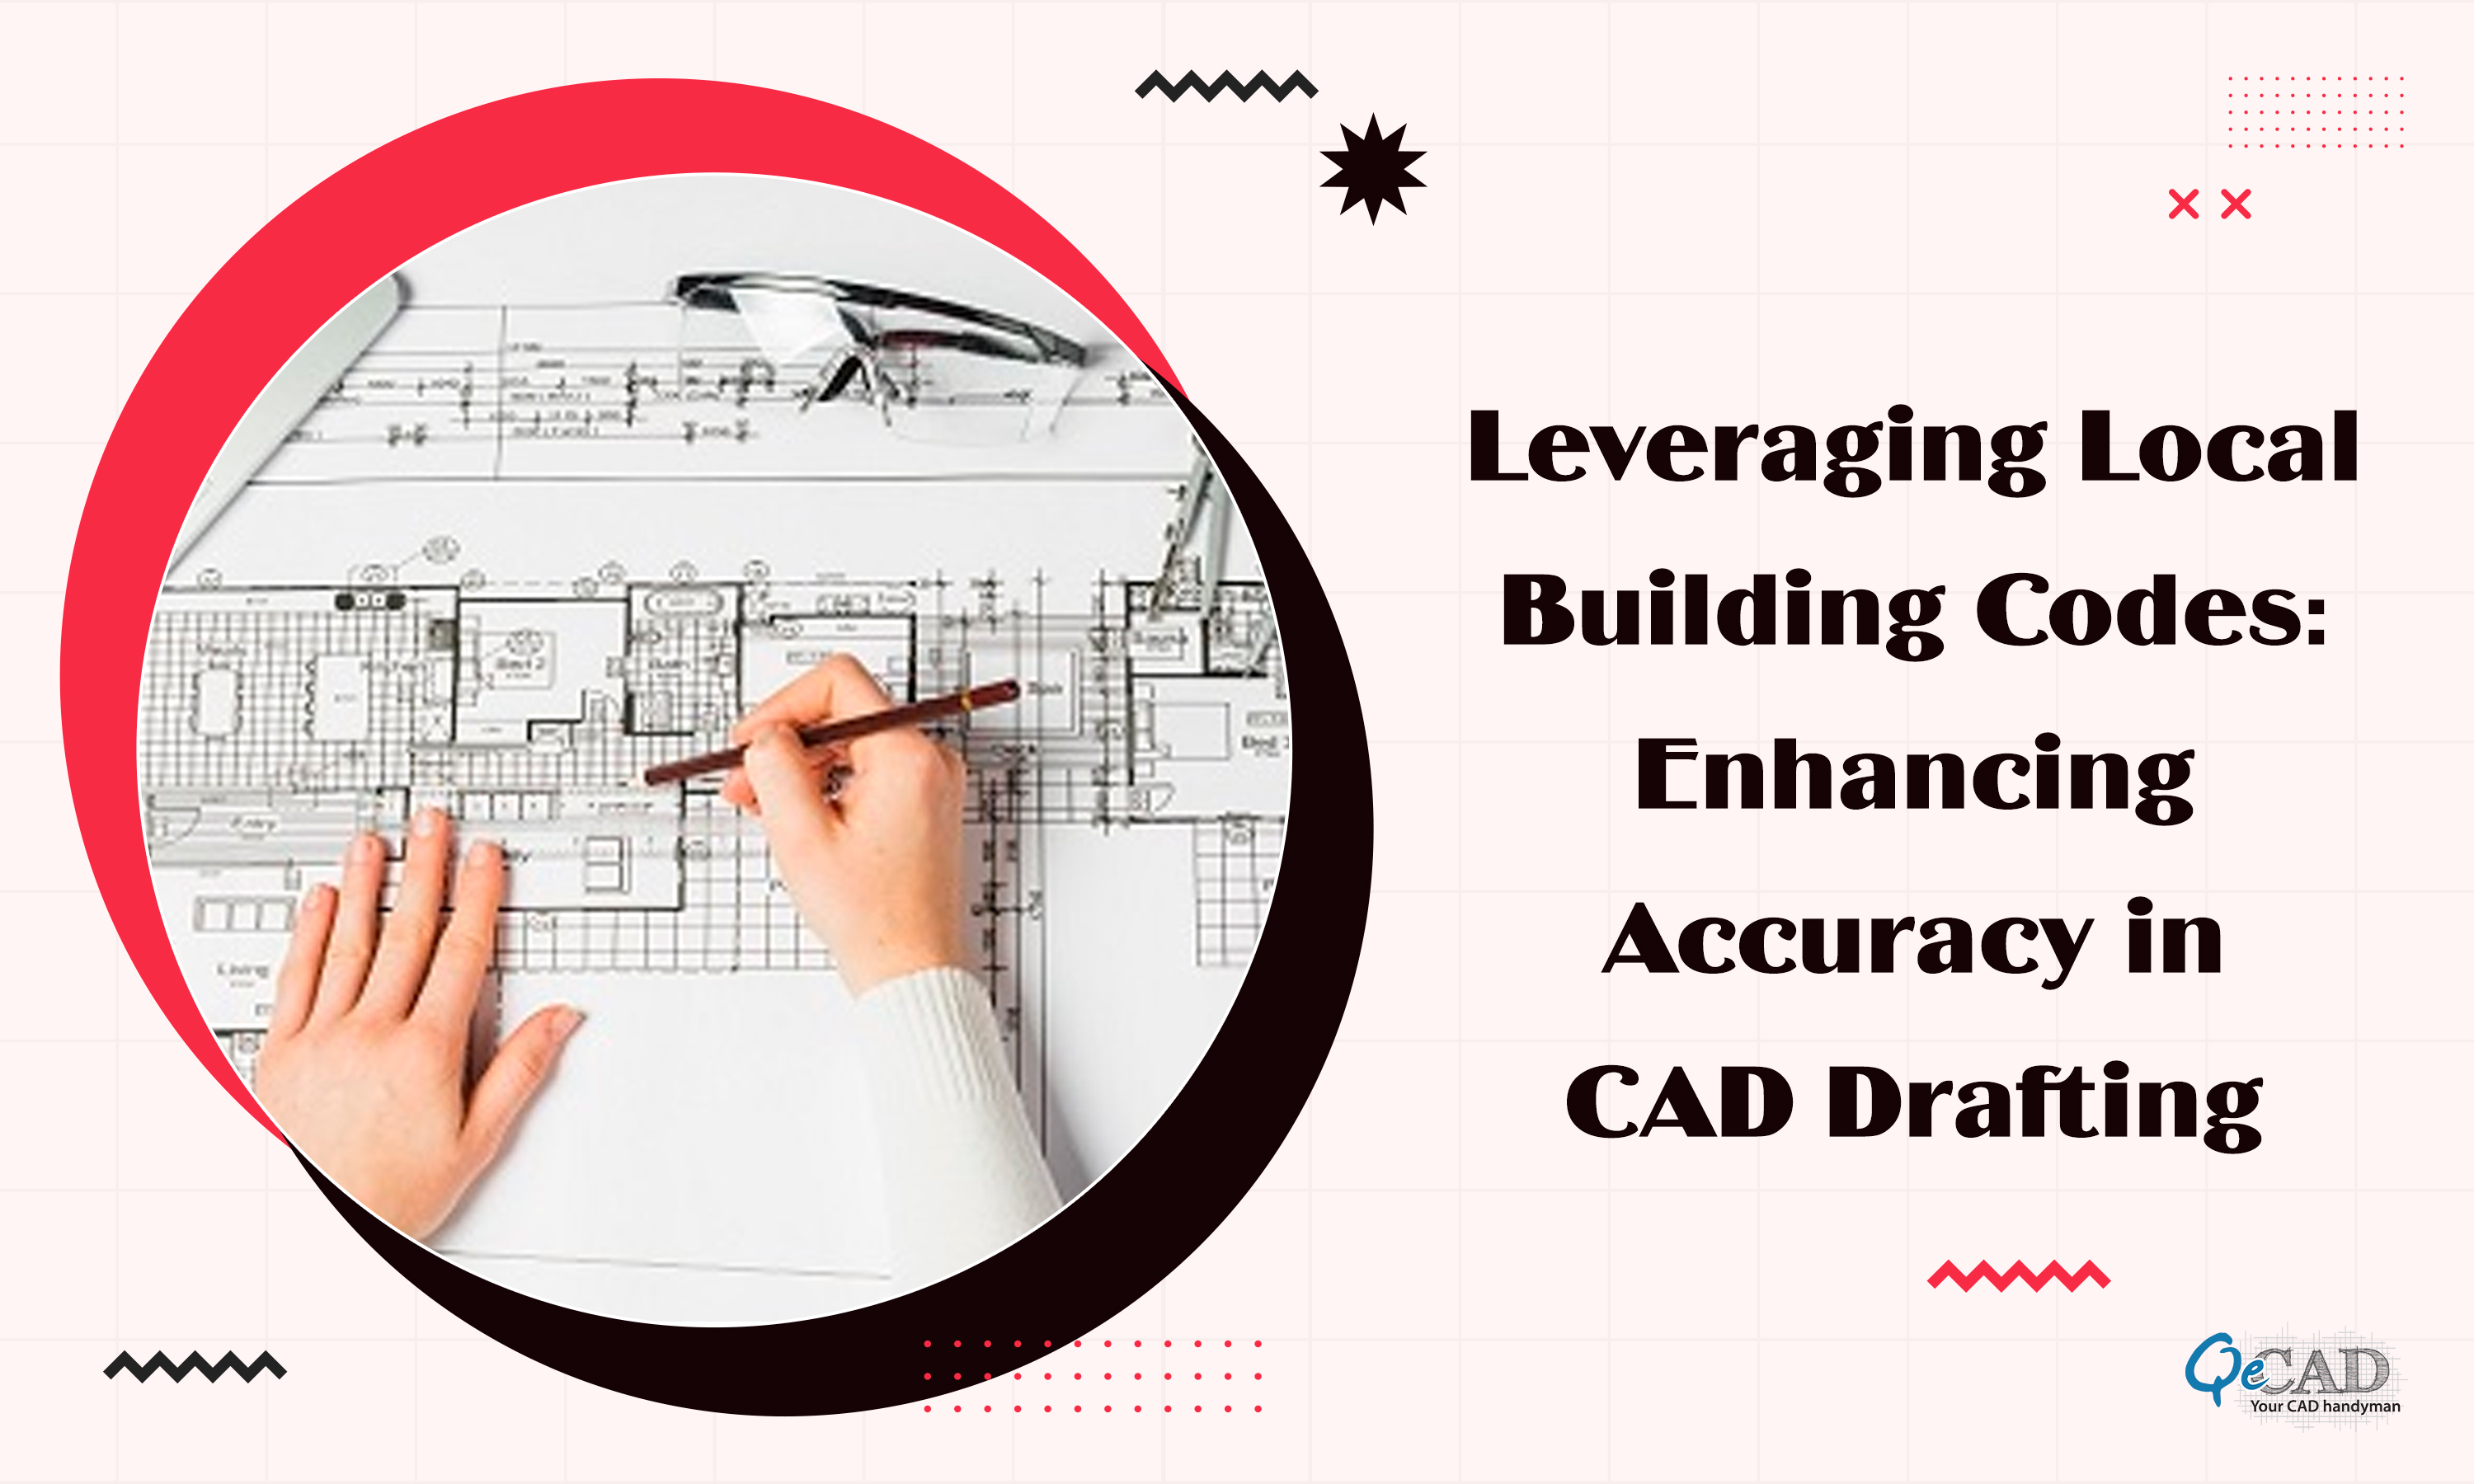 Leveraging Local Building Codes: Enhancing Accuracy in CAD Drafting